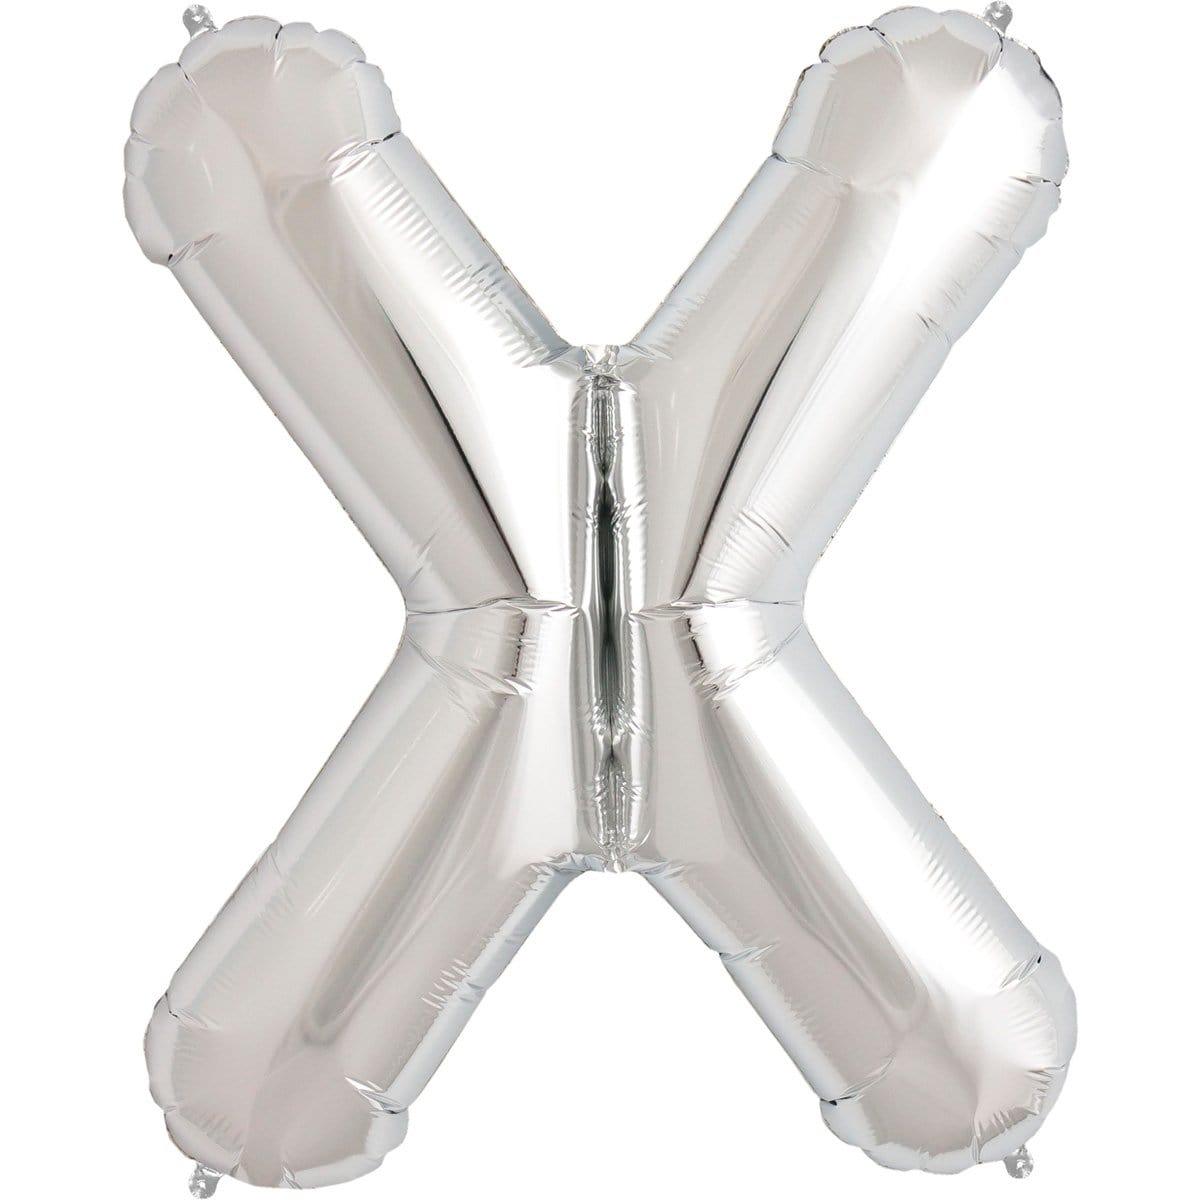 Buy Balloons Silver Letter X Foil Balloon, 16 Inches sold at Party Expert